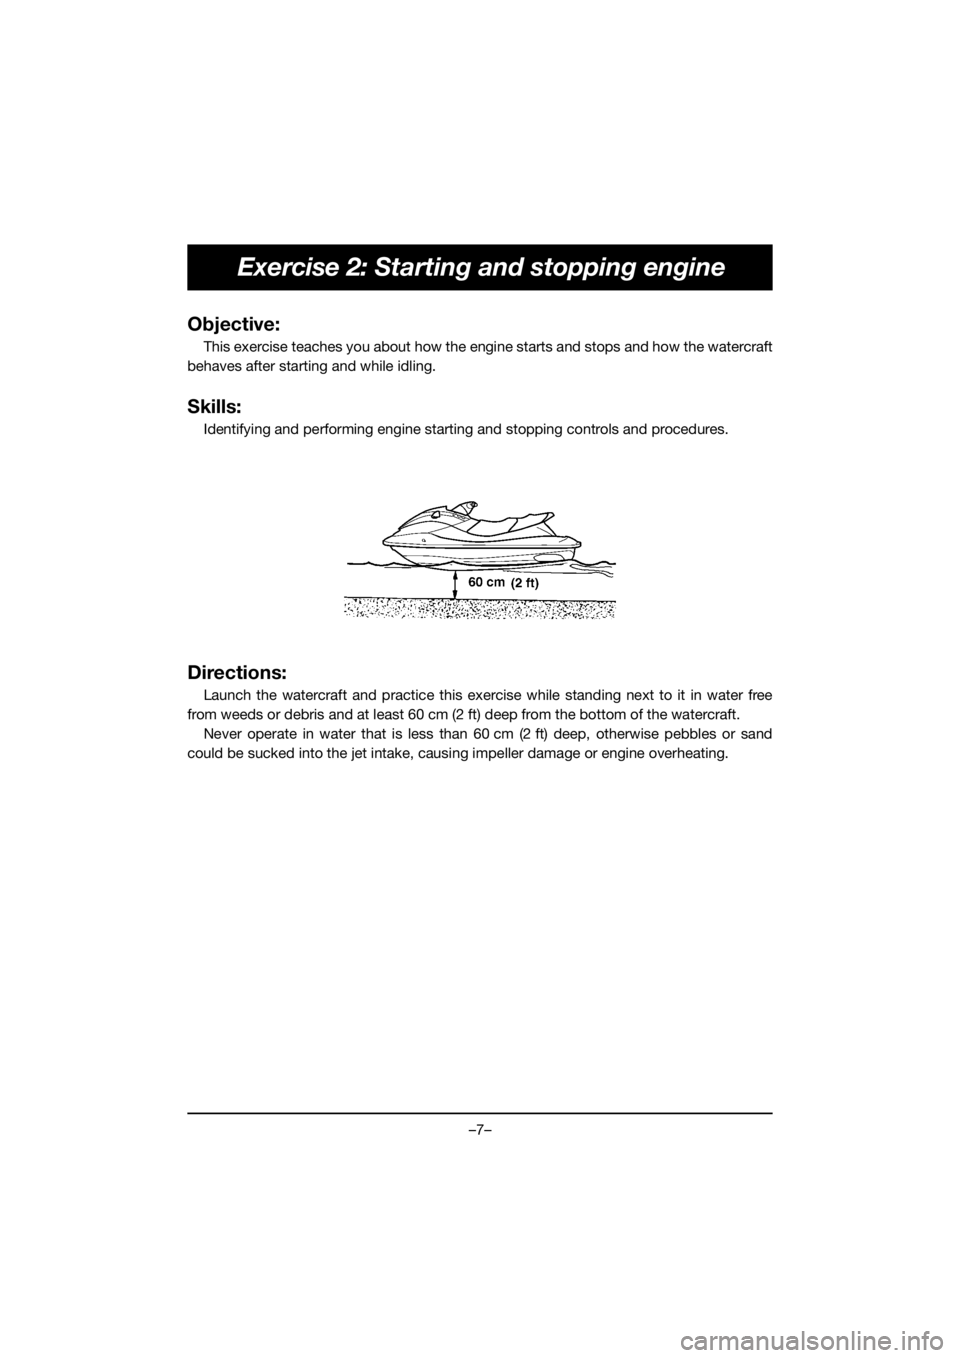 YAMAHA FJR1300 2020  ΟΔΗΓΌΣ ΧΡΉΣΗΣ (in Greek) –7–
Exercise 2: Starting and stopping engine
Objective:
This exercise teaches you about how the engine starts and stops and how the watercraft
behaves after starting and while idling.
Skills:
Iden